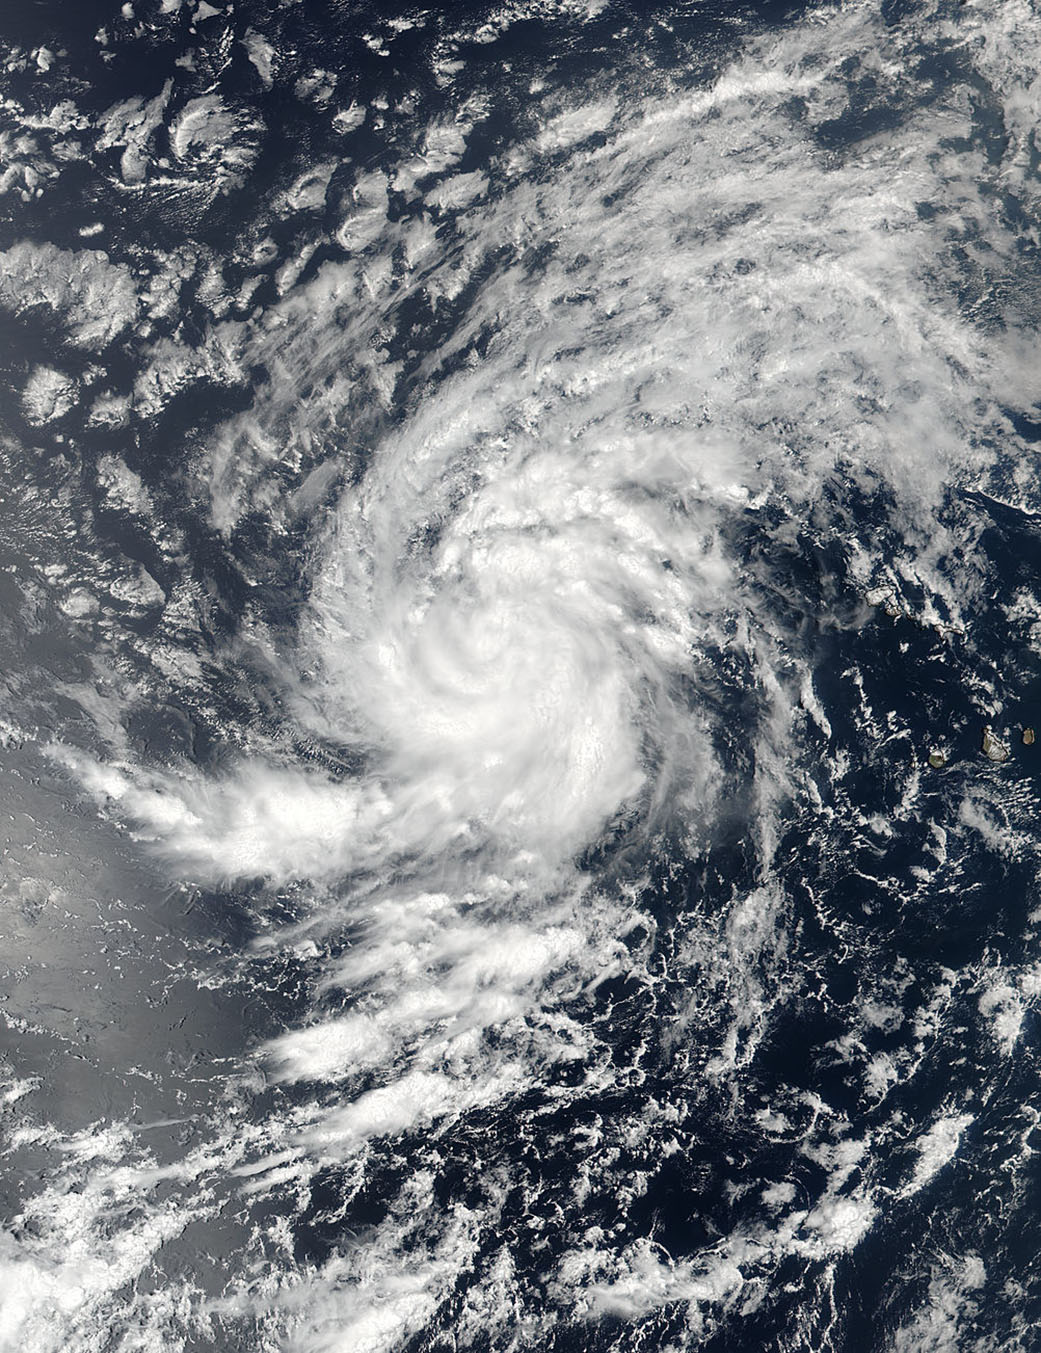 Satellite image of Irma, a scattered cloud mass with some spiraling.